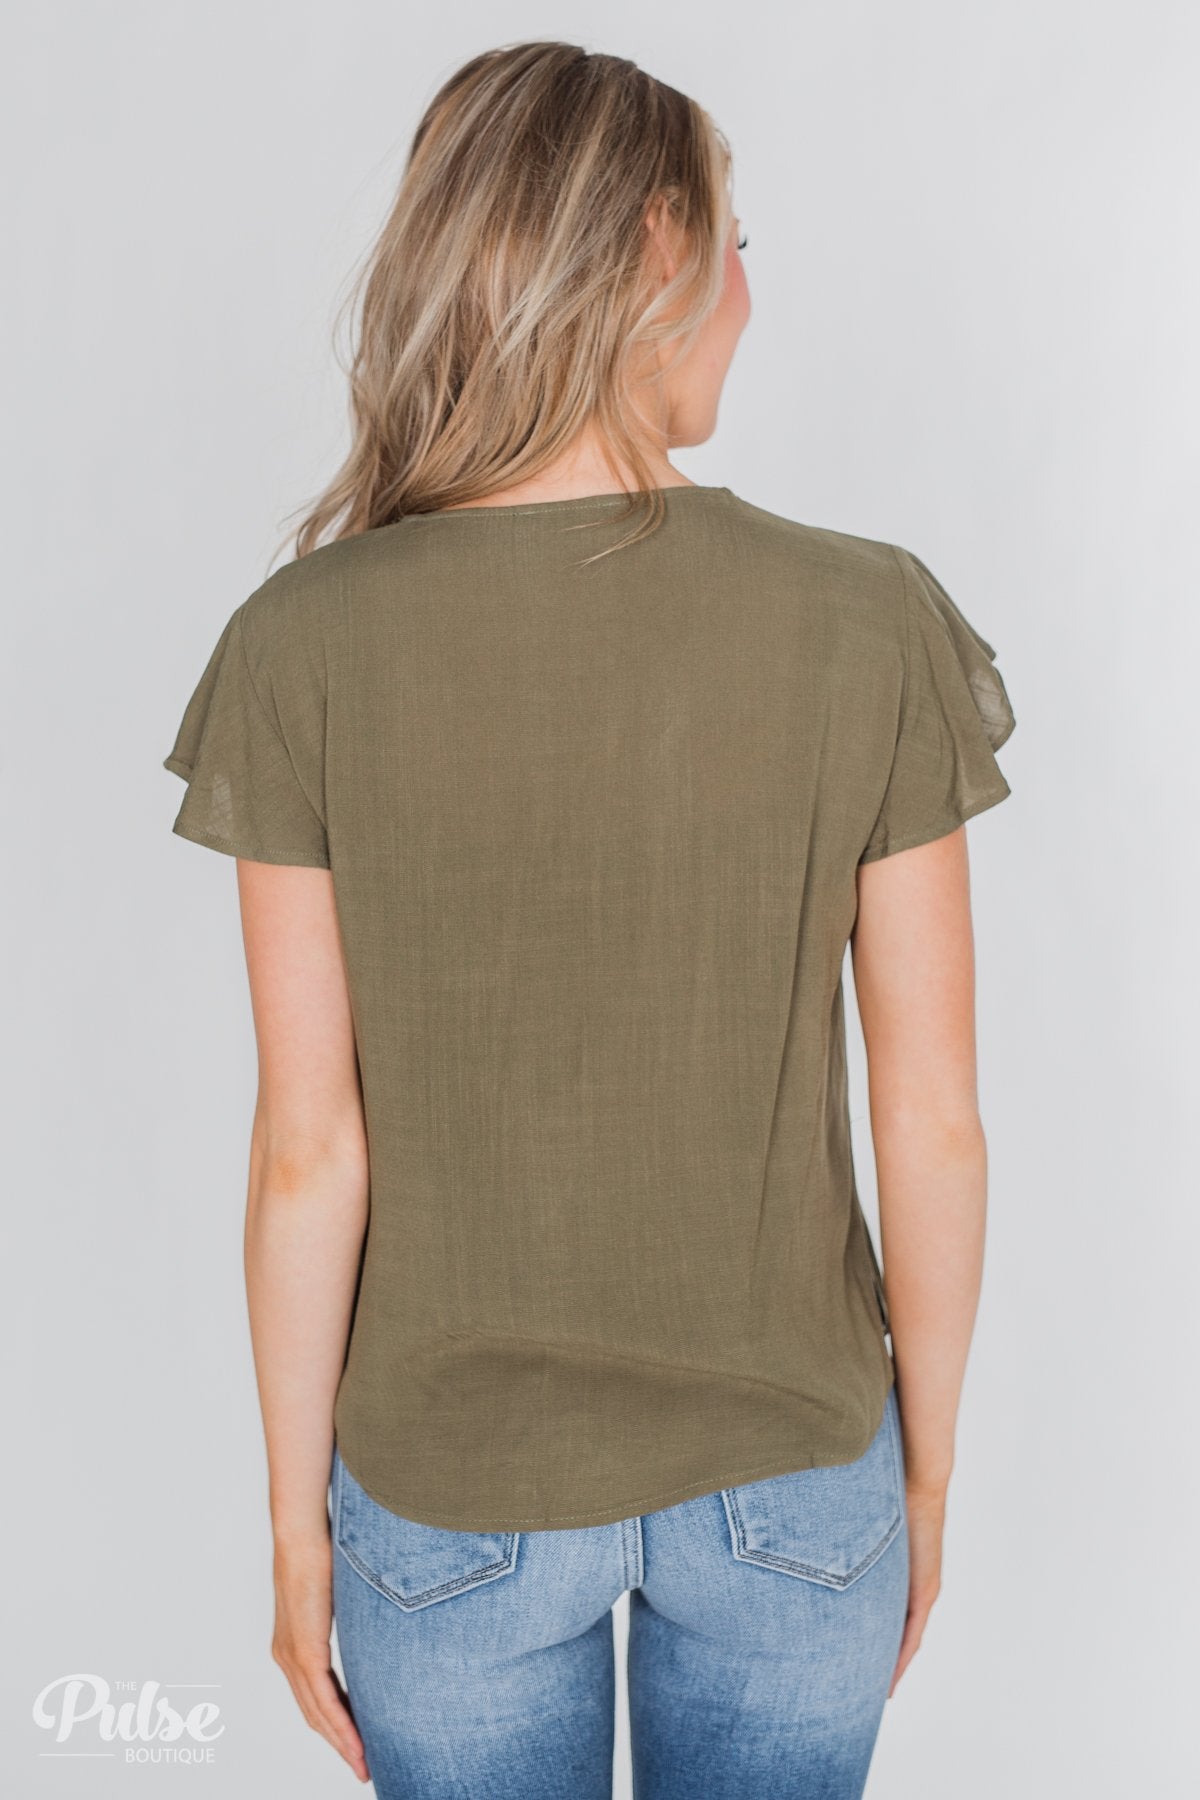 Believe in Me Button Down Top- Olive